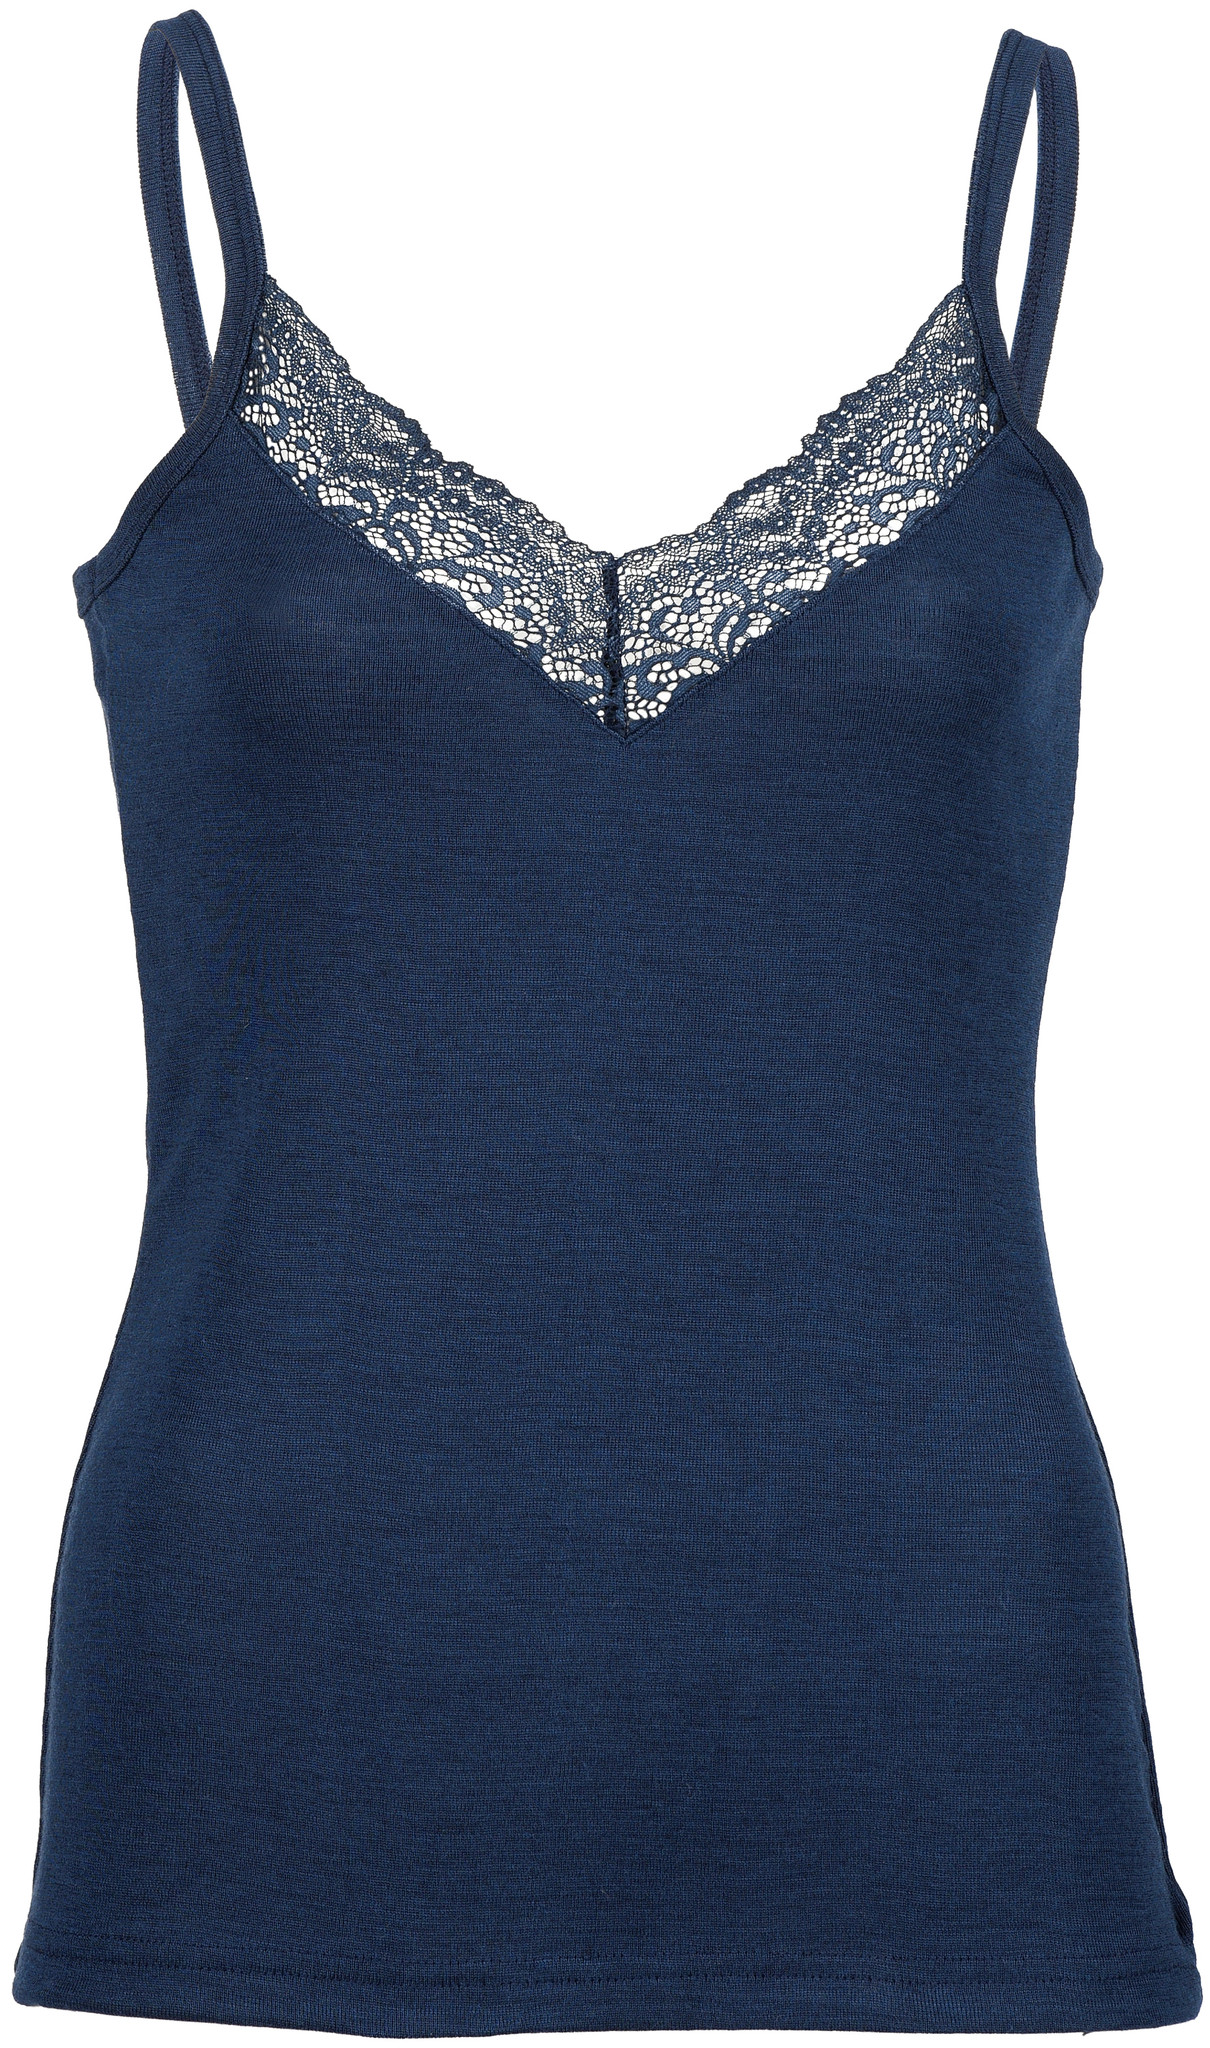 Engel Merino Wool/Silk Women's Top with Lace - Merino Wool Clothes for ...